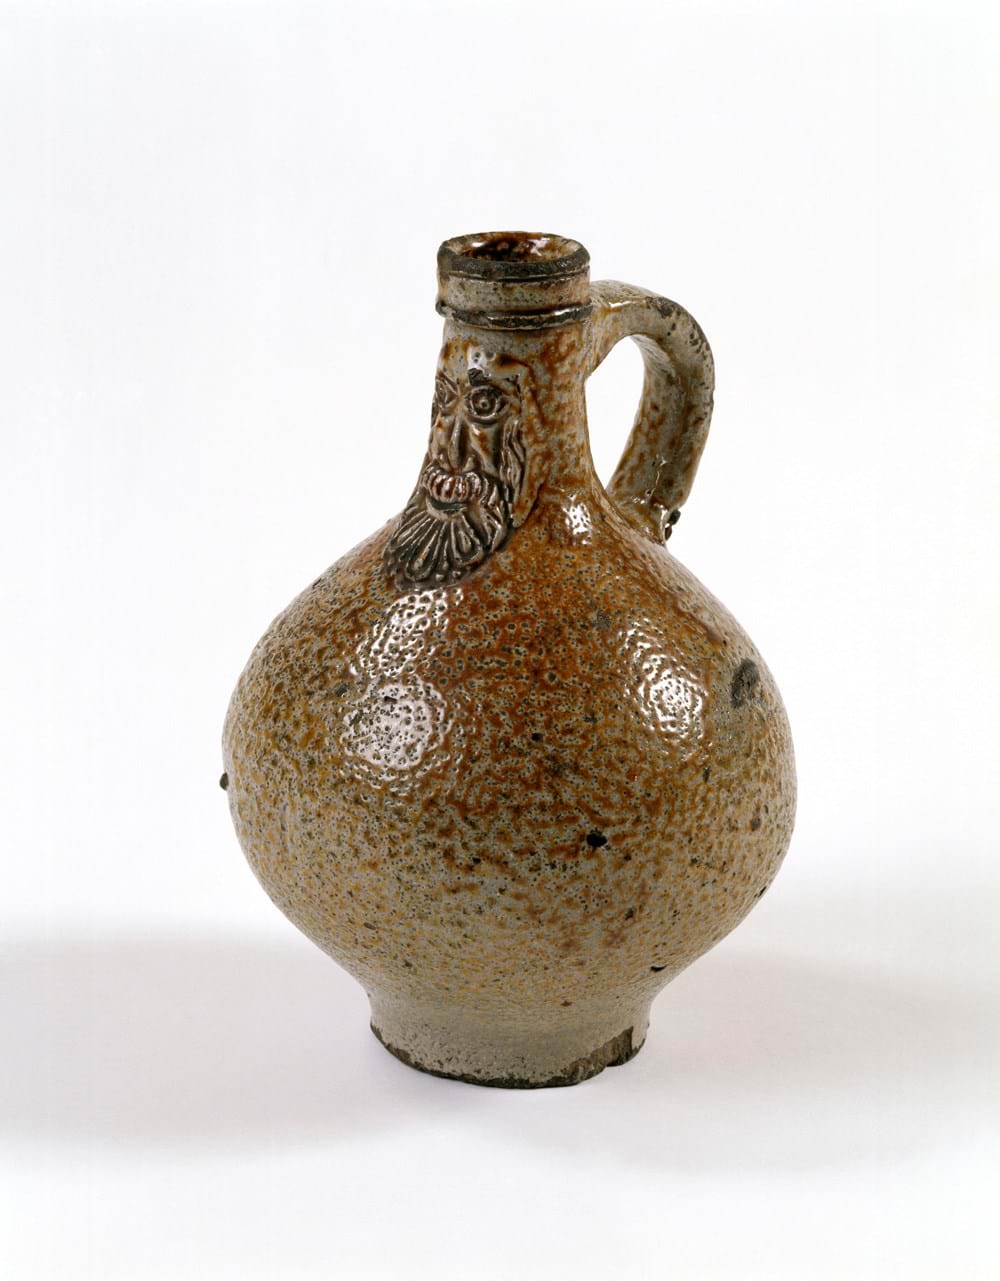 Brown jug with engraving of a face